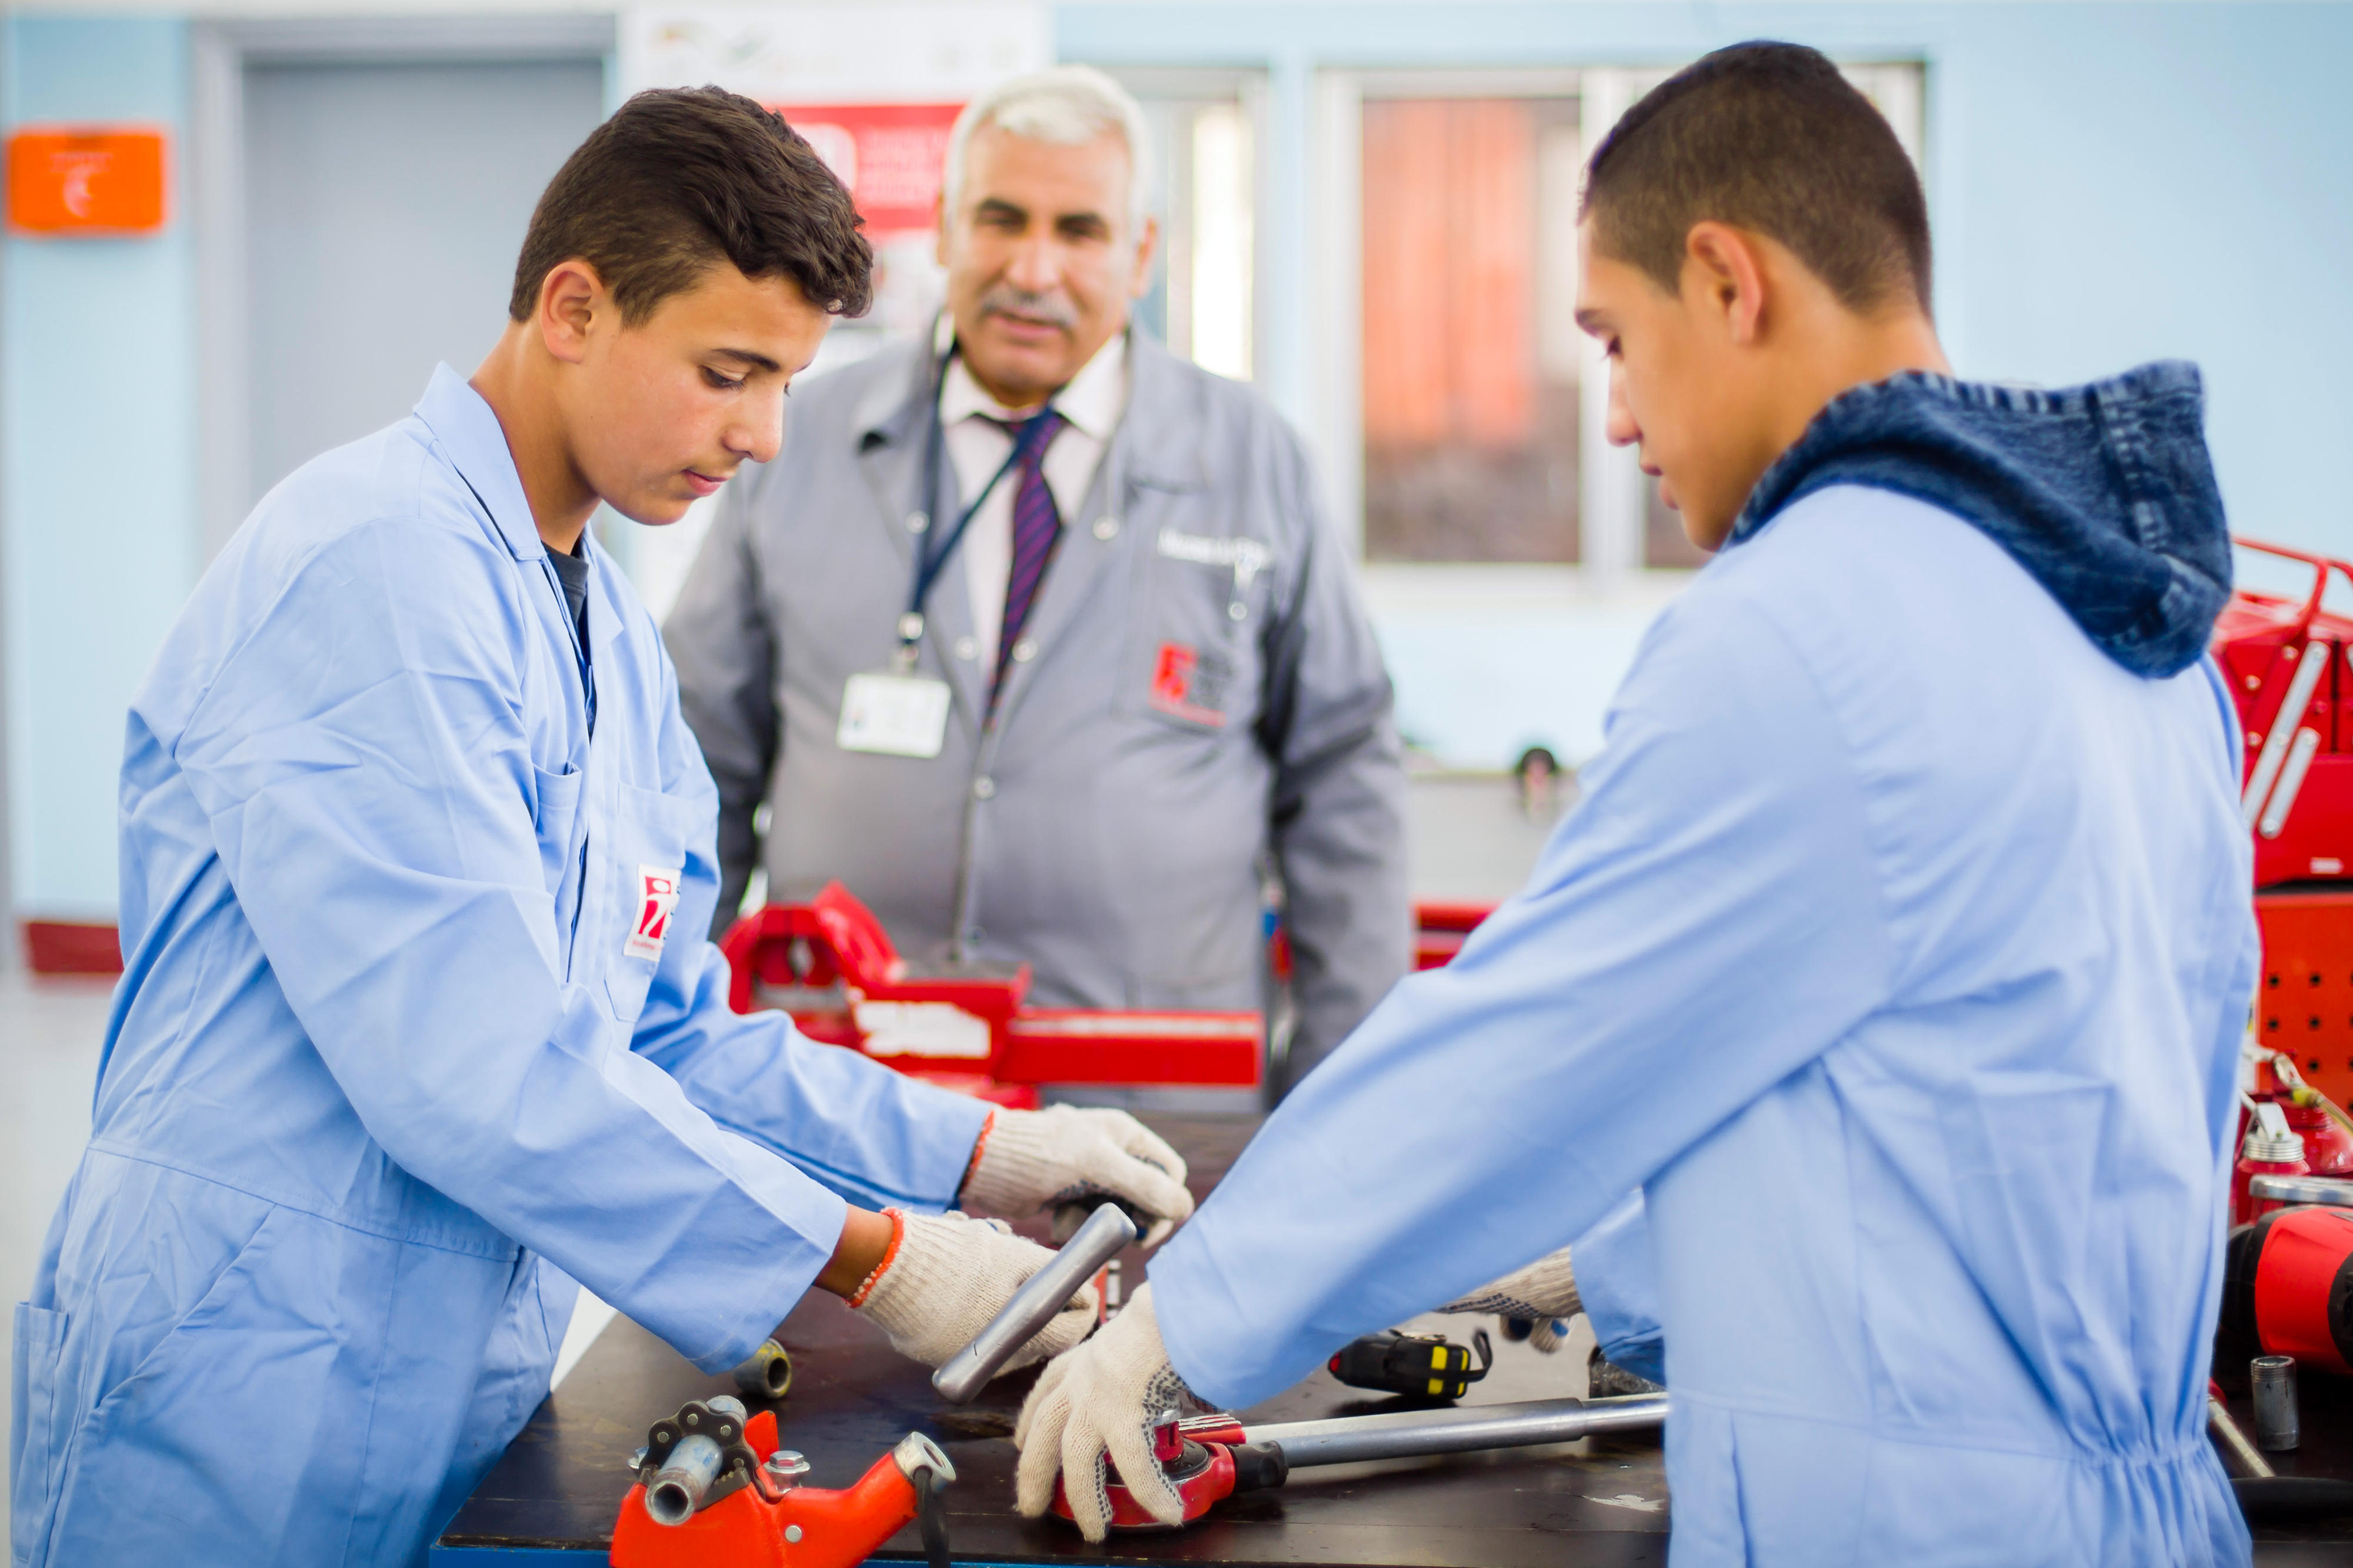 Trainees in a vocational training centre in Jordan